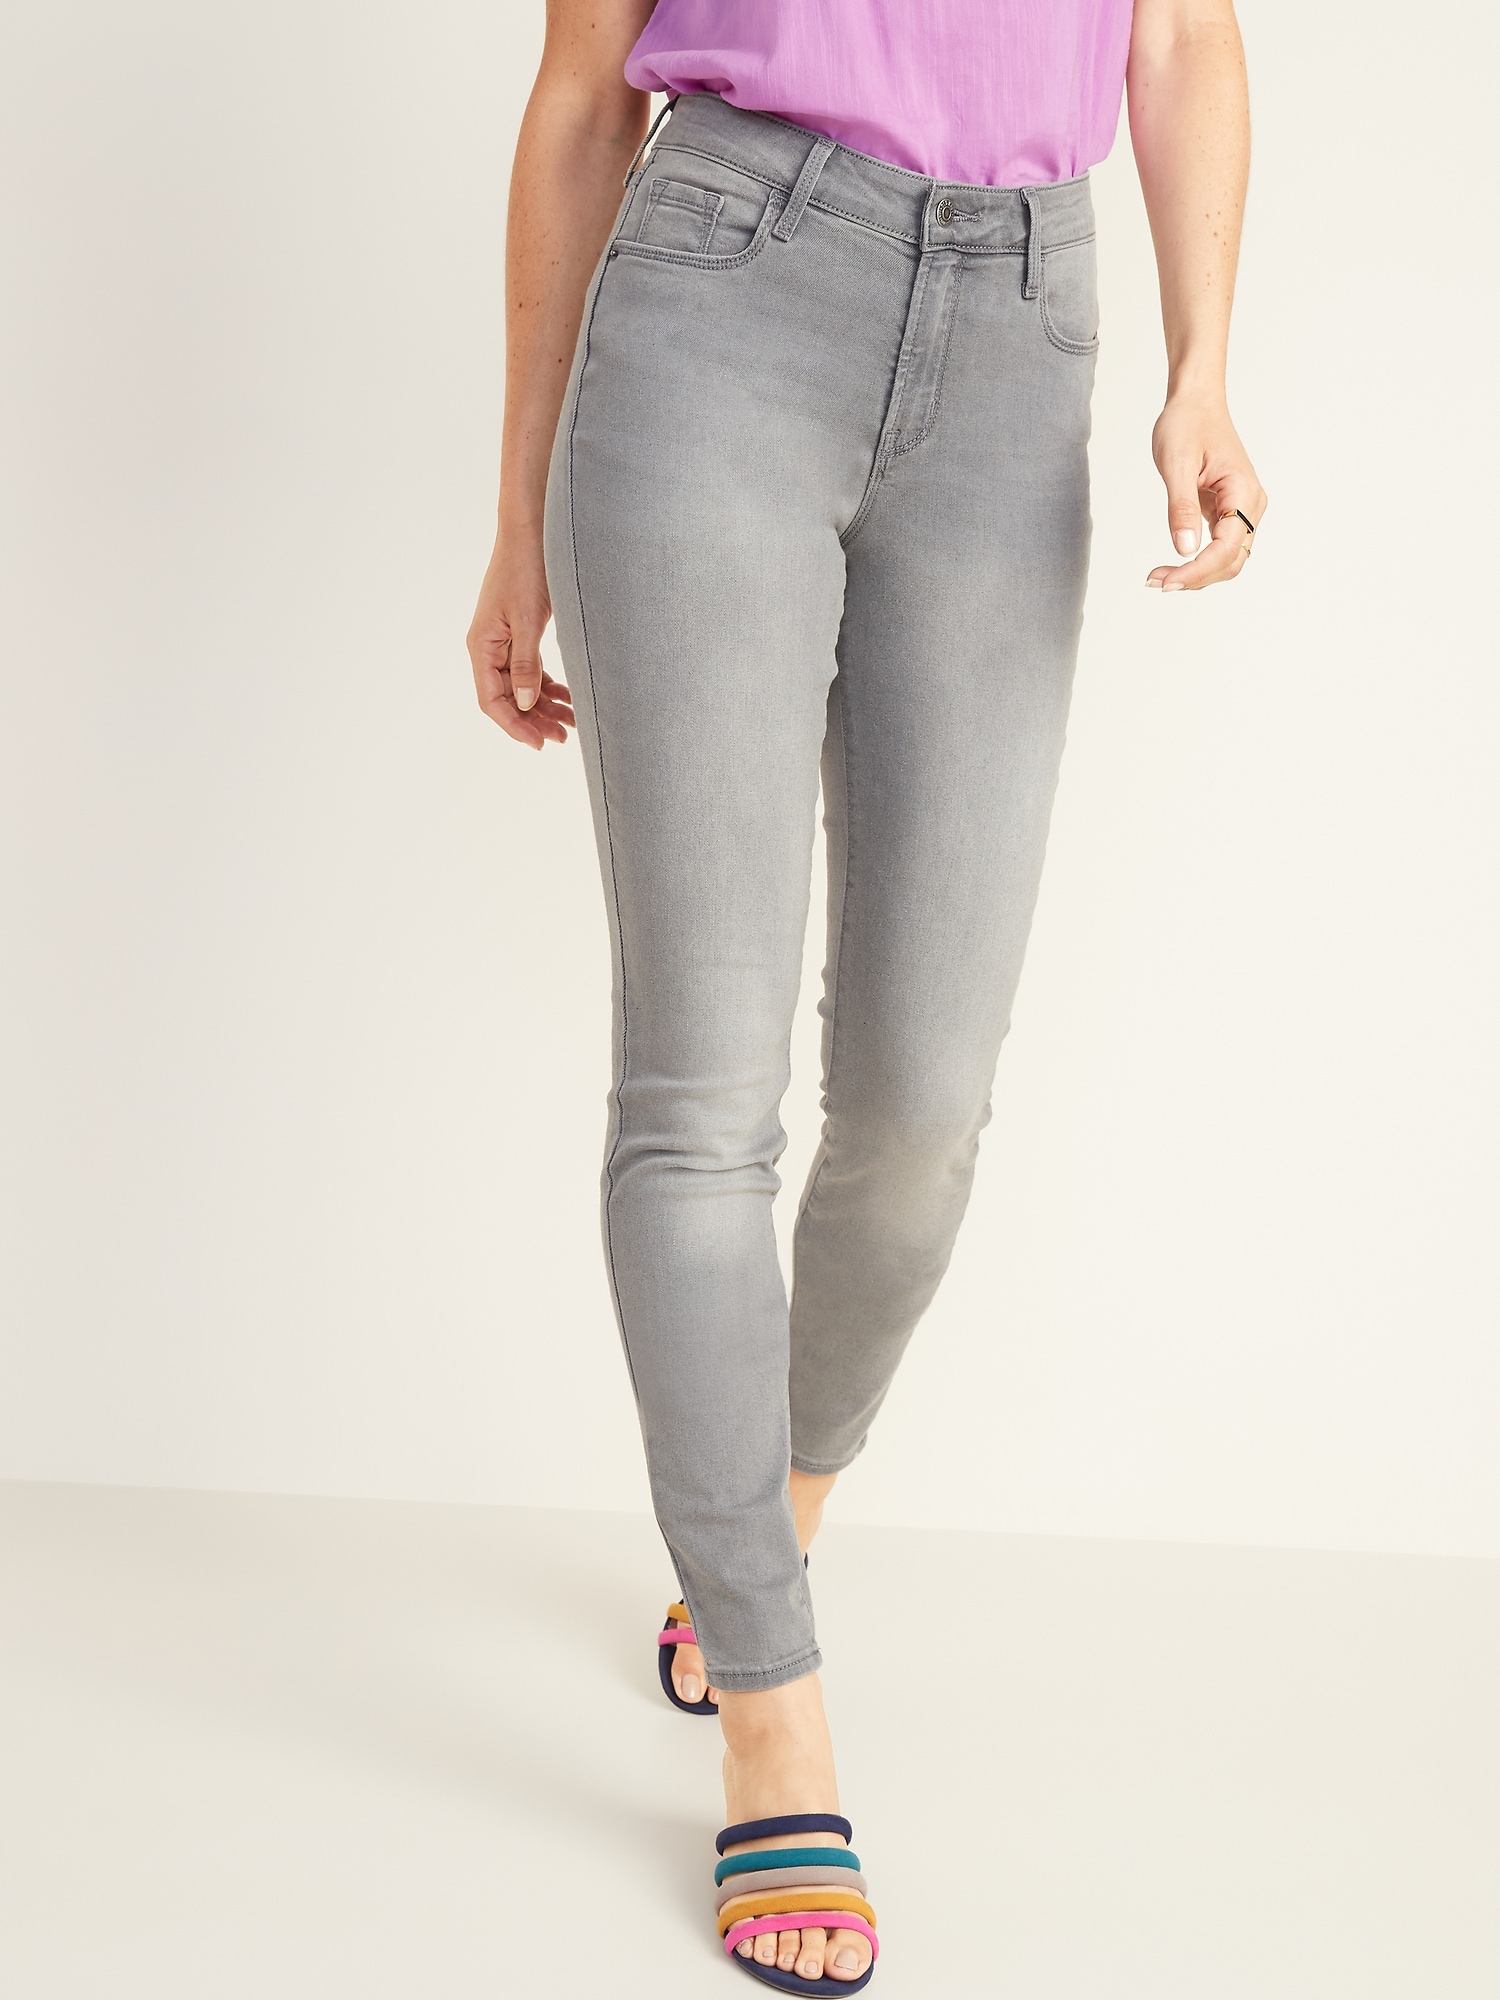 grey wash jeans womens